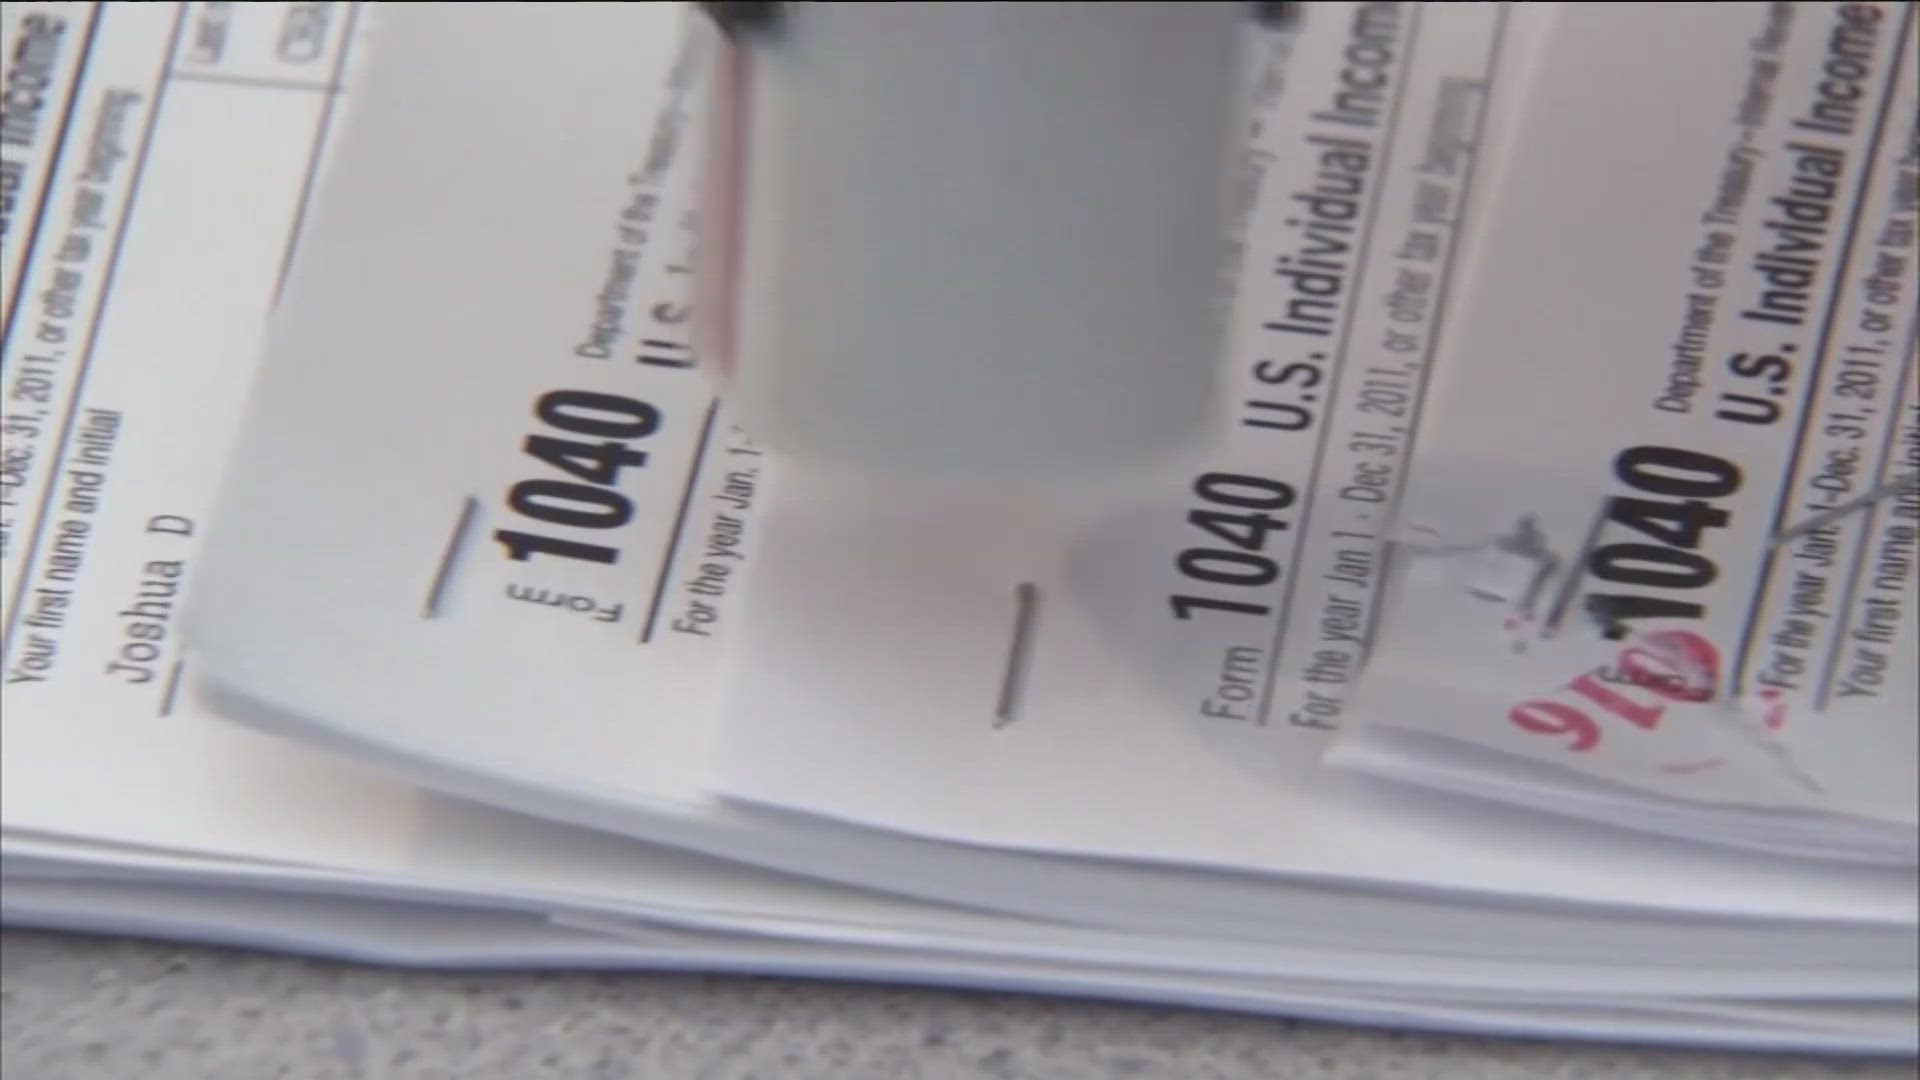 Taxpayers have an extra six months until the deadline to file and pay in San Diego County.